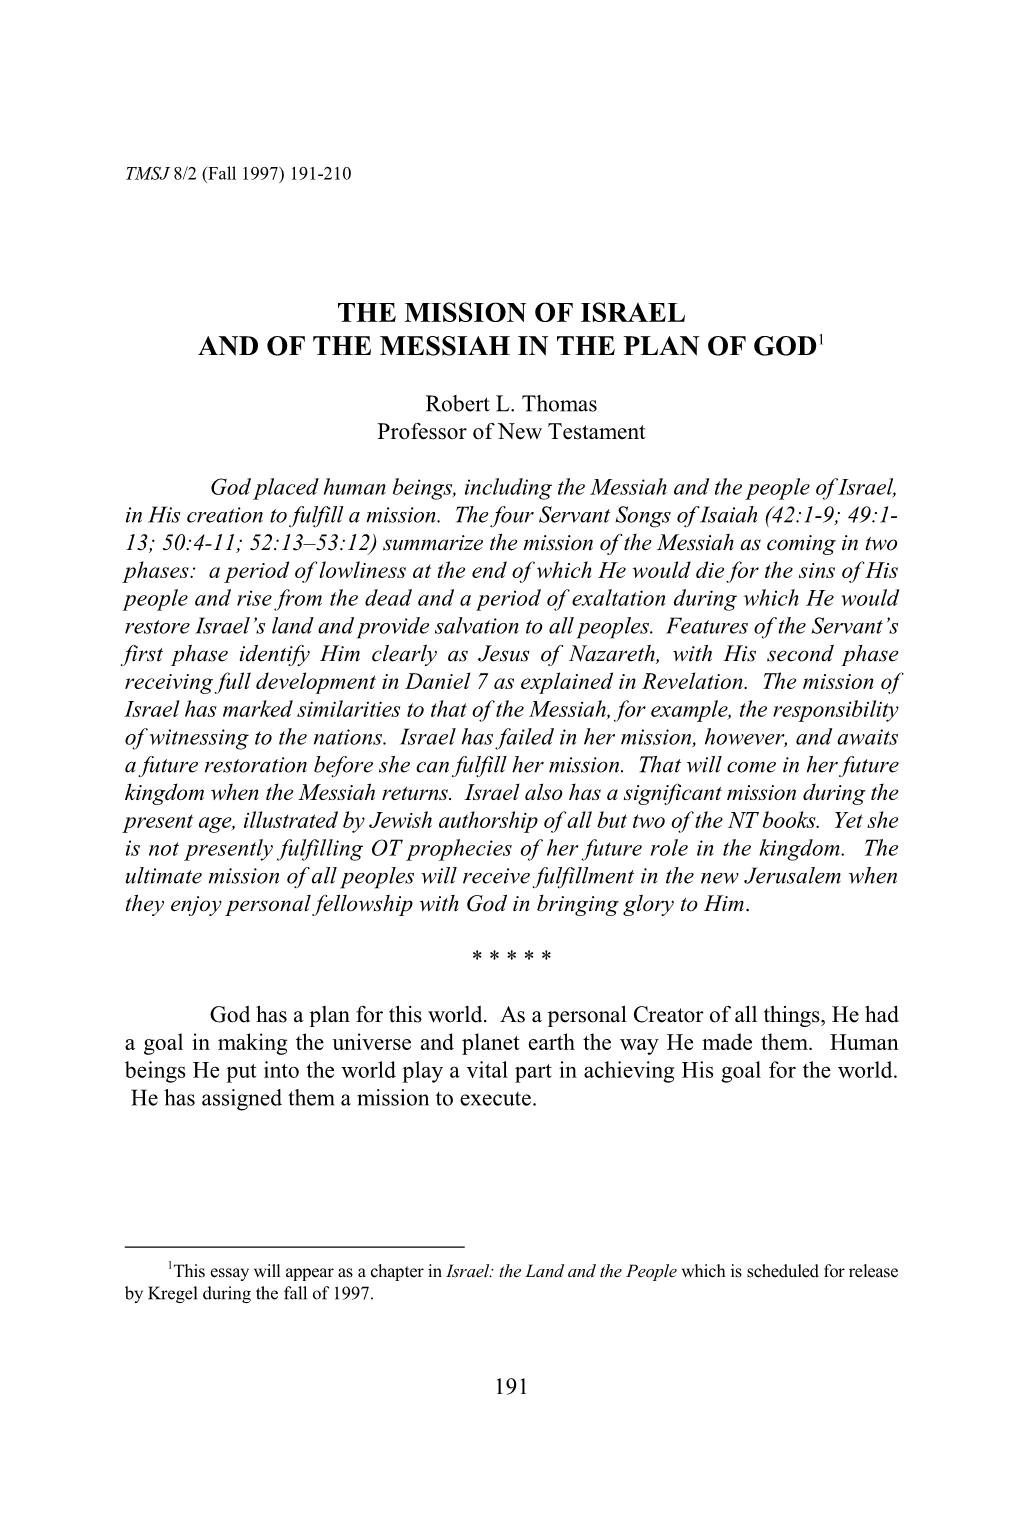 The Mission of Israel and of the Messiah in the Plan of God1